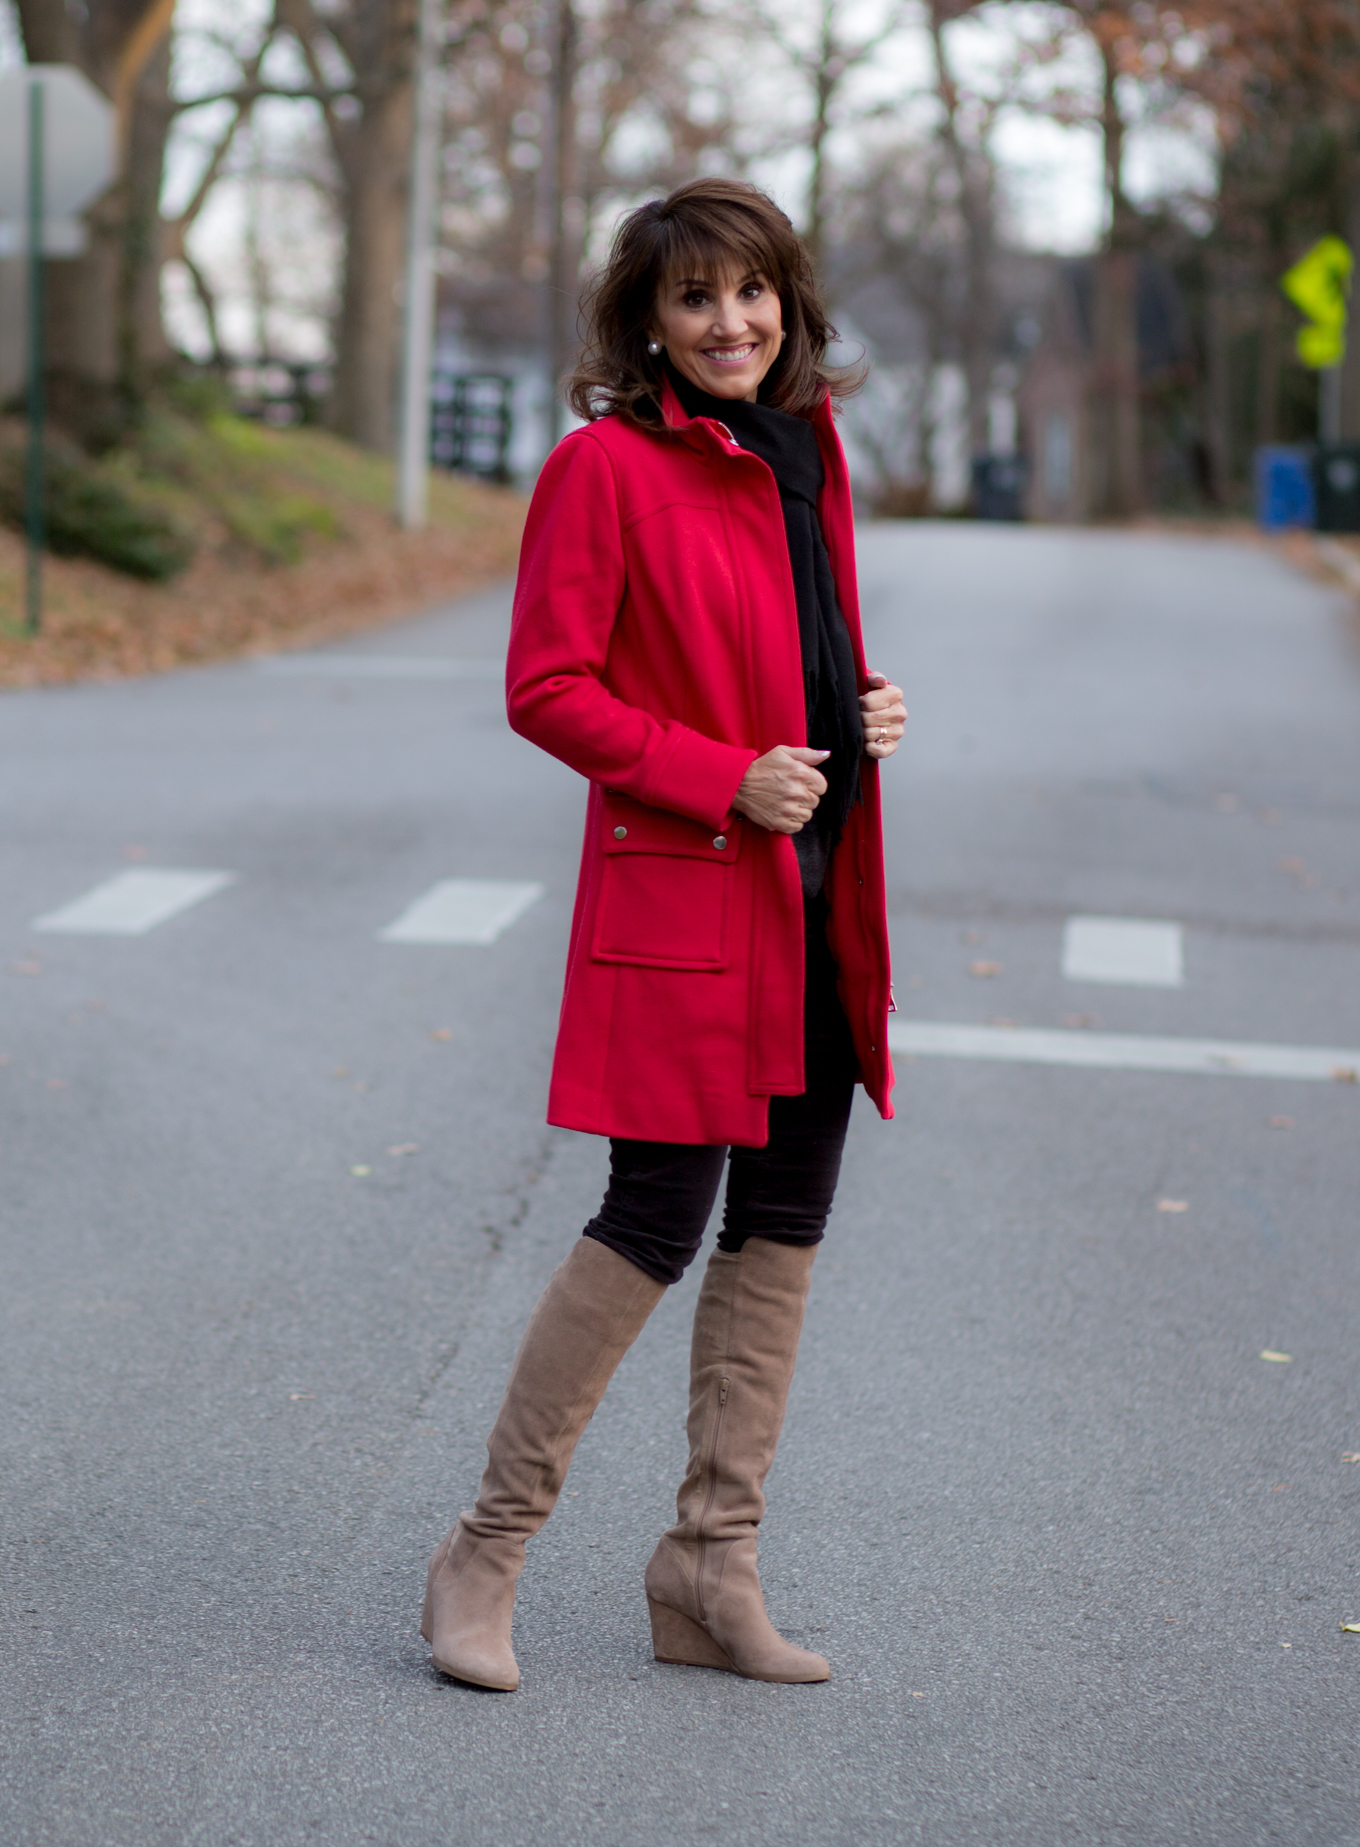 25 Days of Winter Fashion: Reindeer Sweater + Corduroy Pants + Red Coat